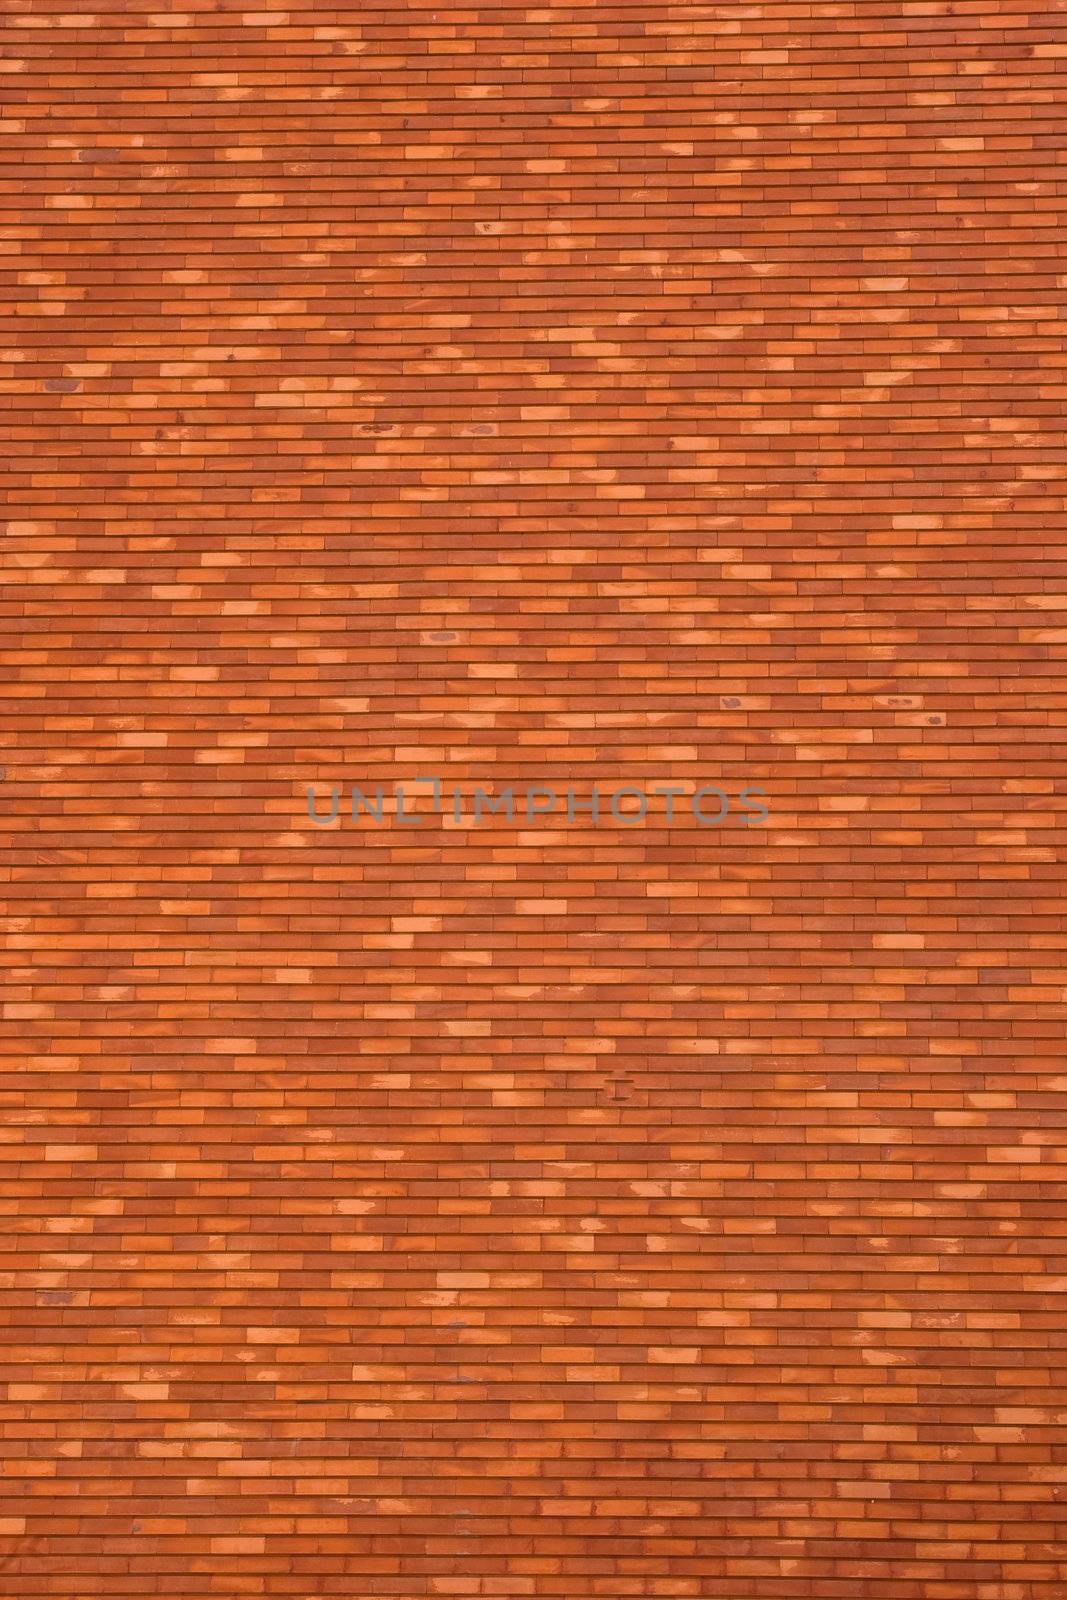 Brick wall background by Iko